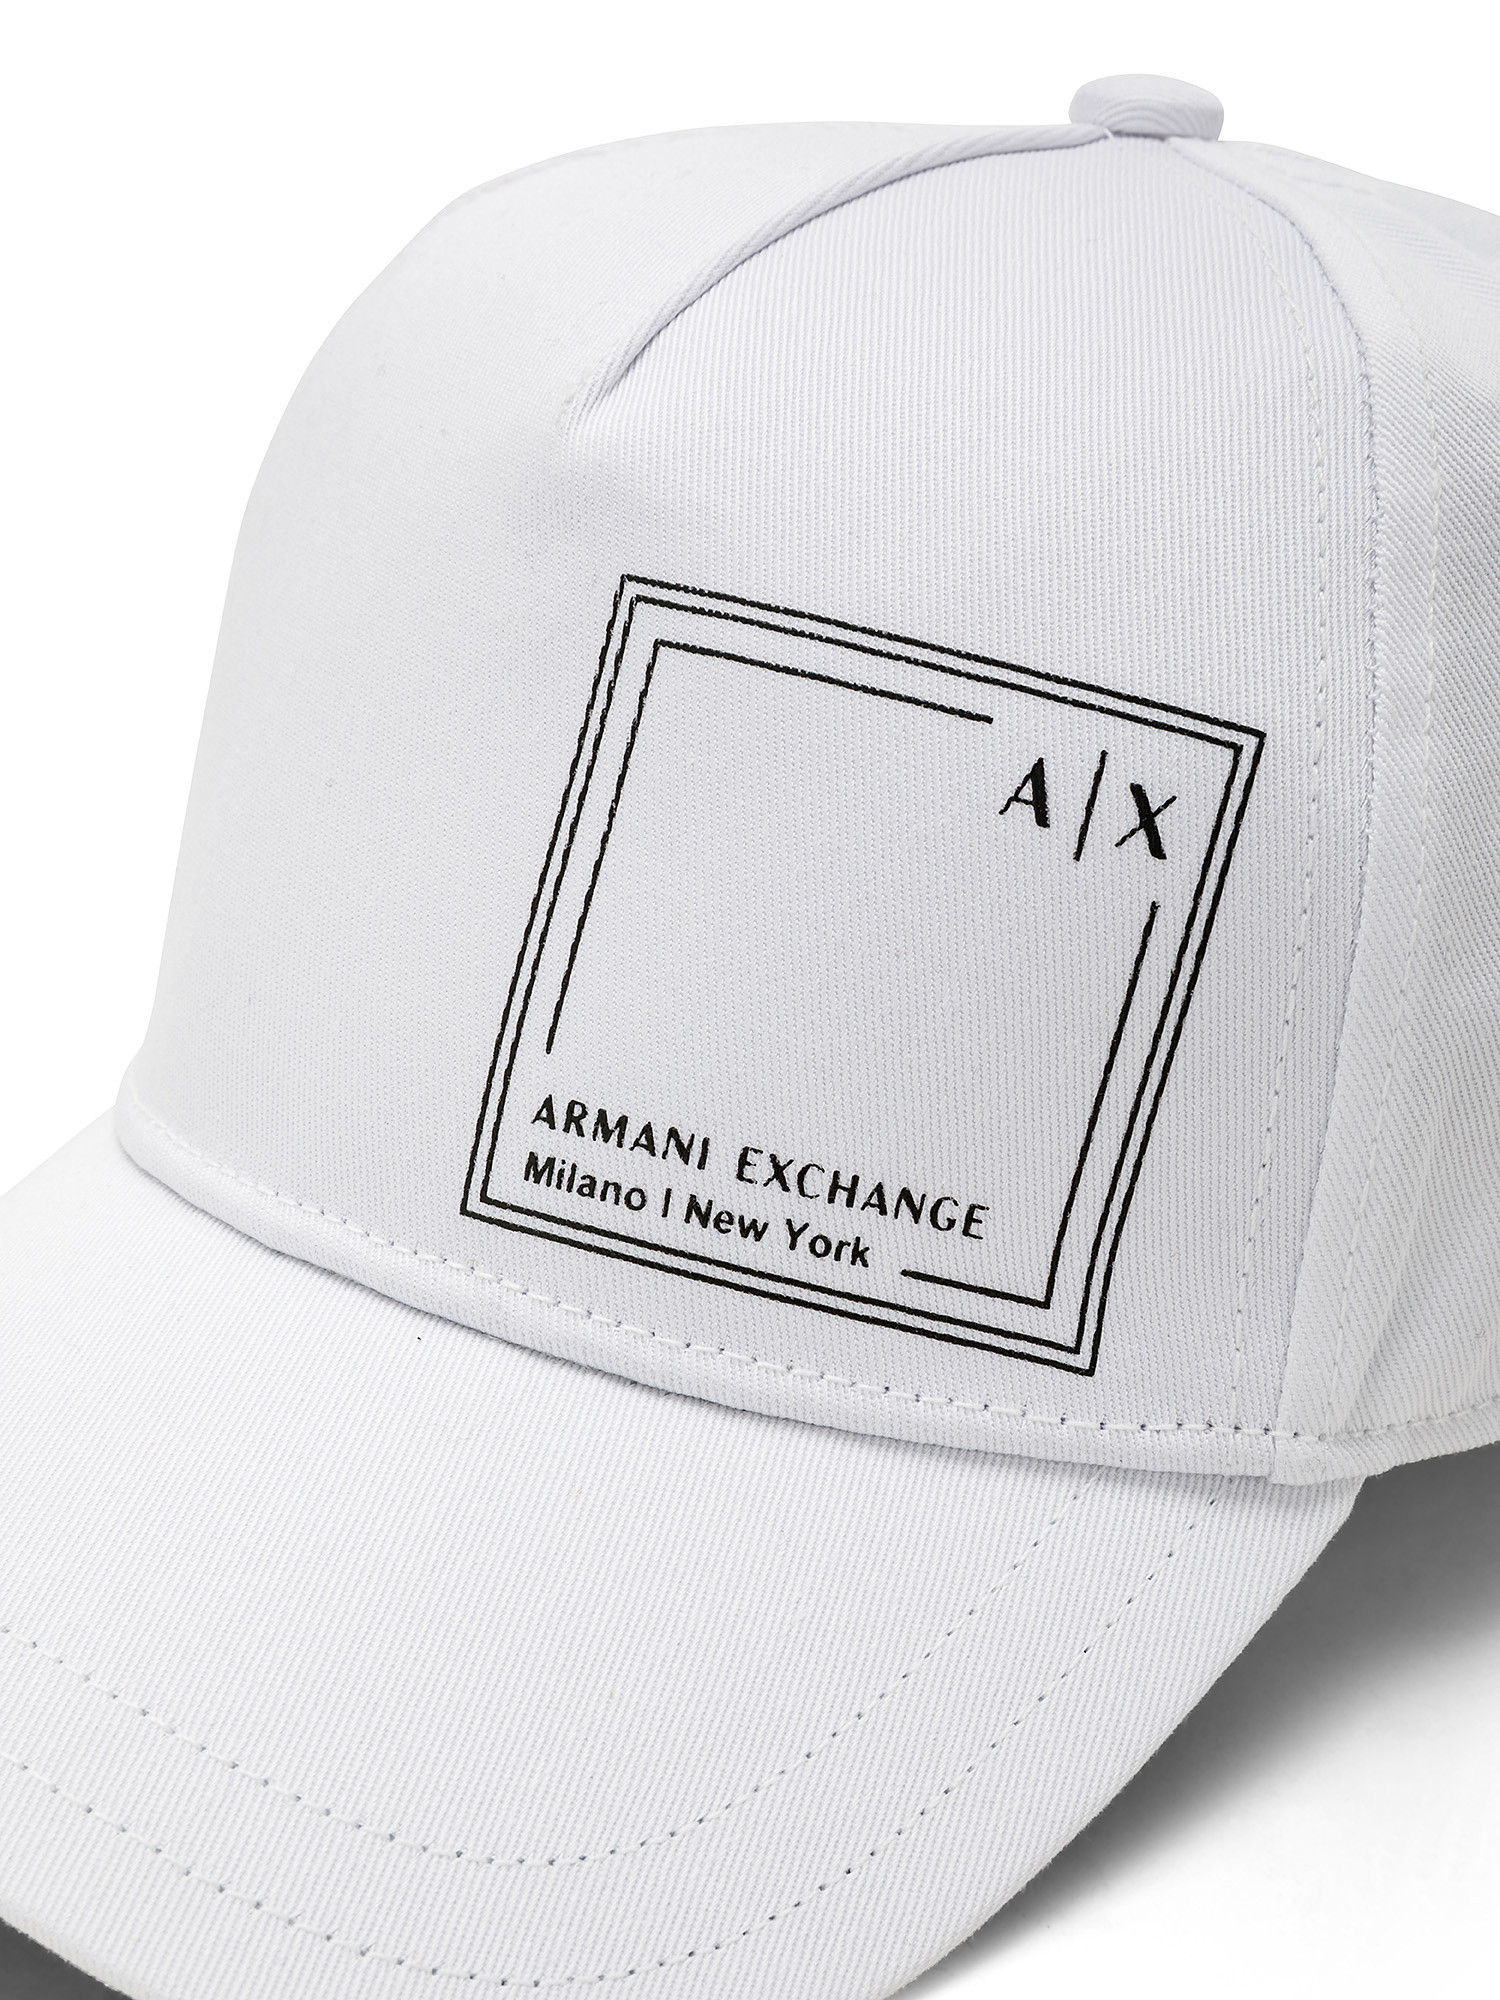 Armani Exchange - Cappello baseball in cotone, Bianco, large image number 1